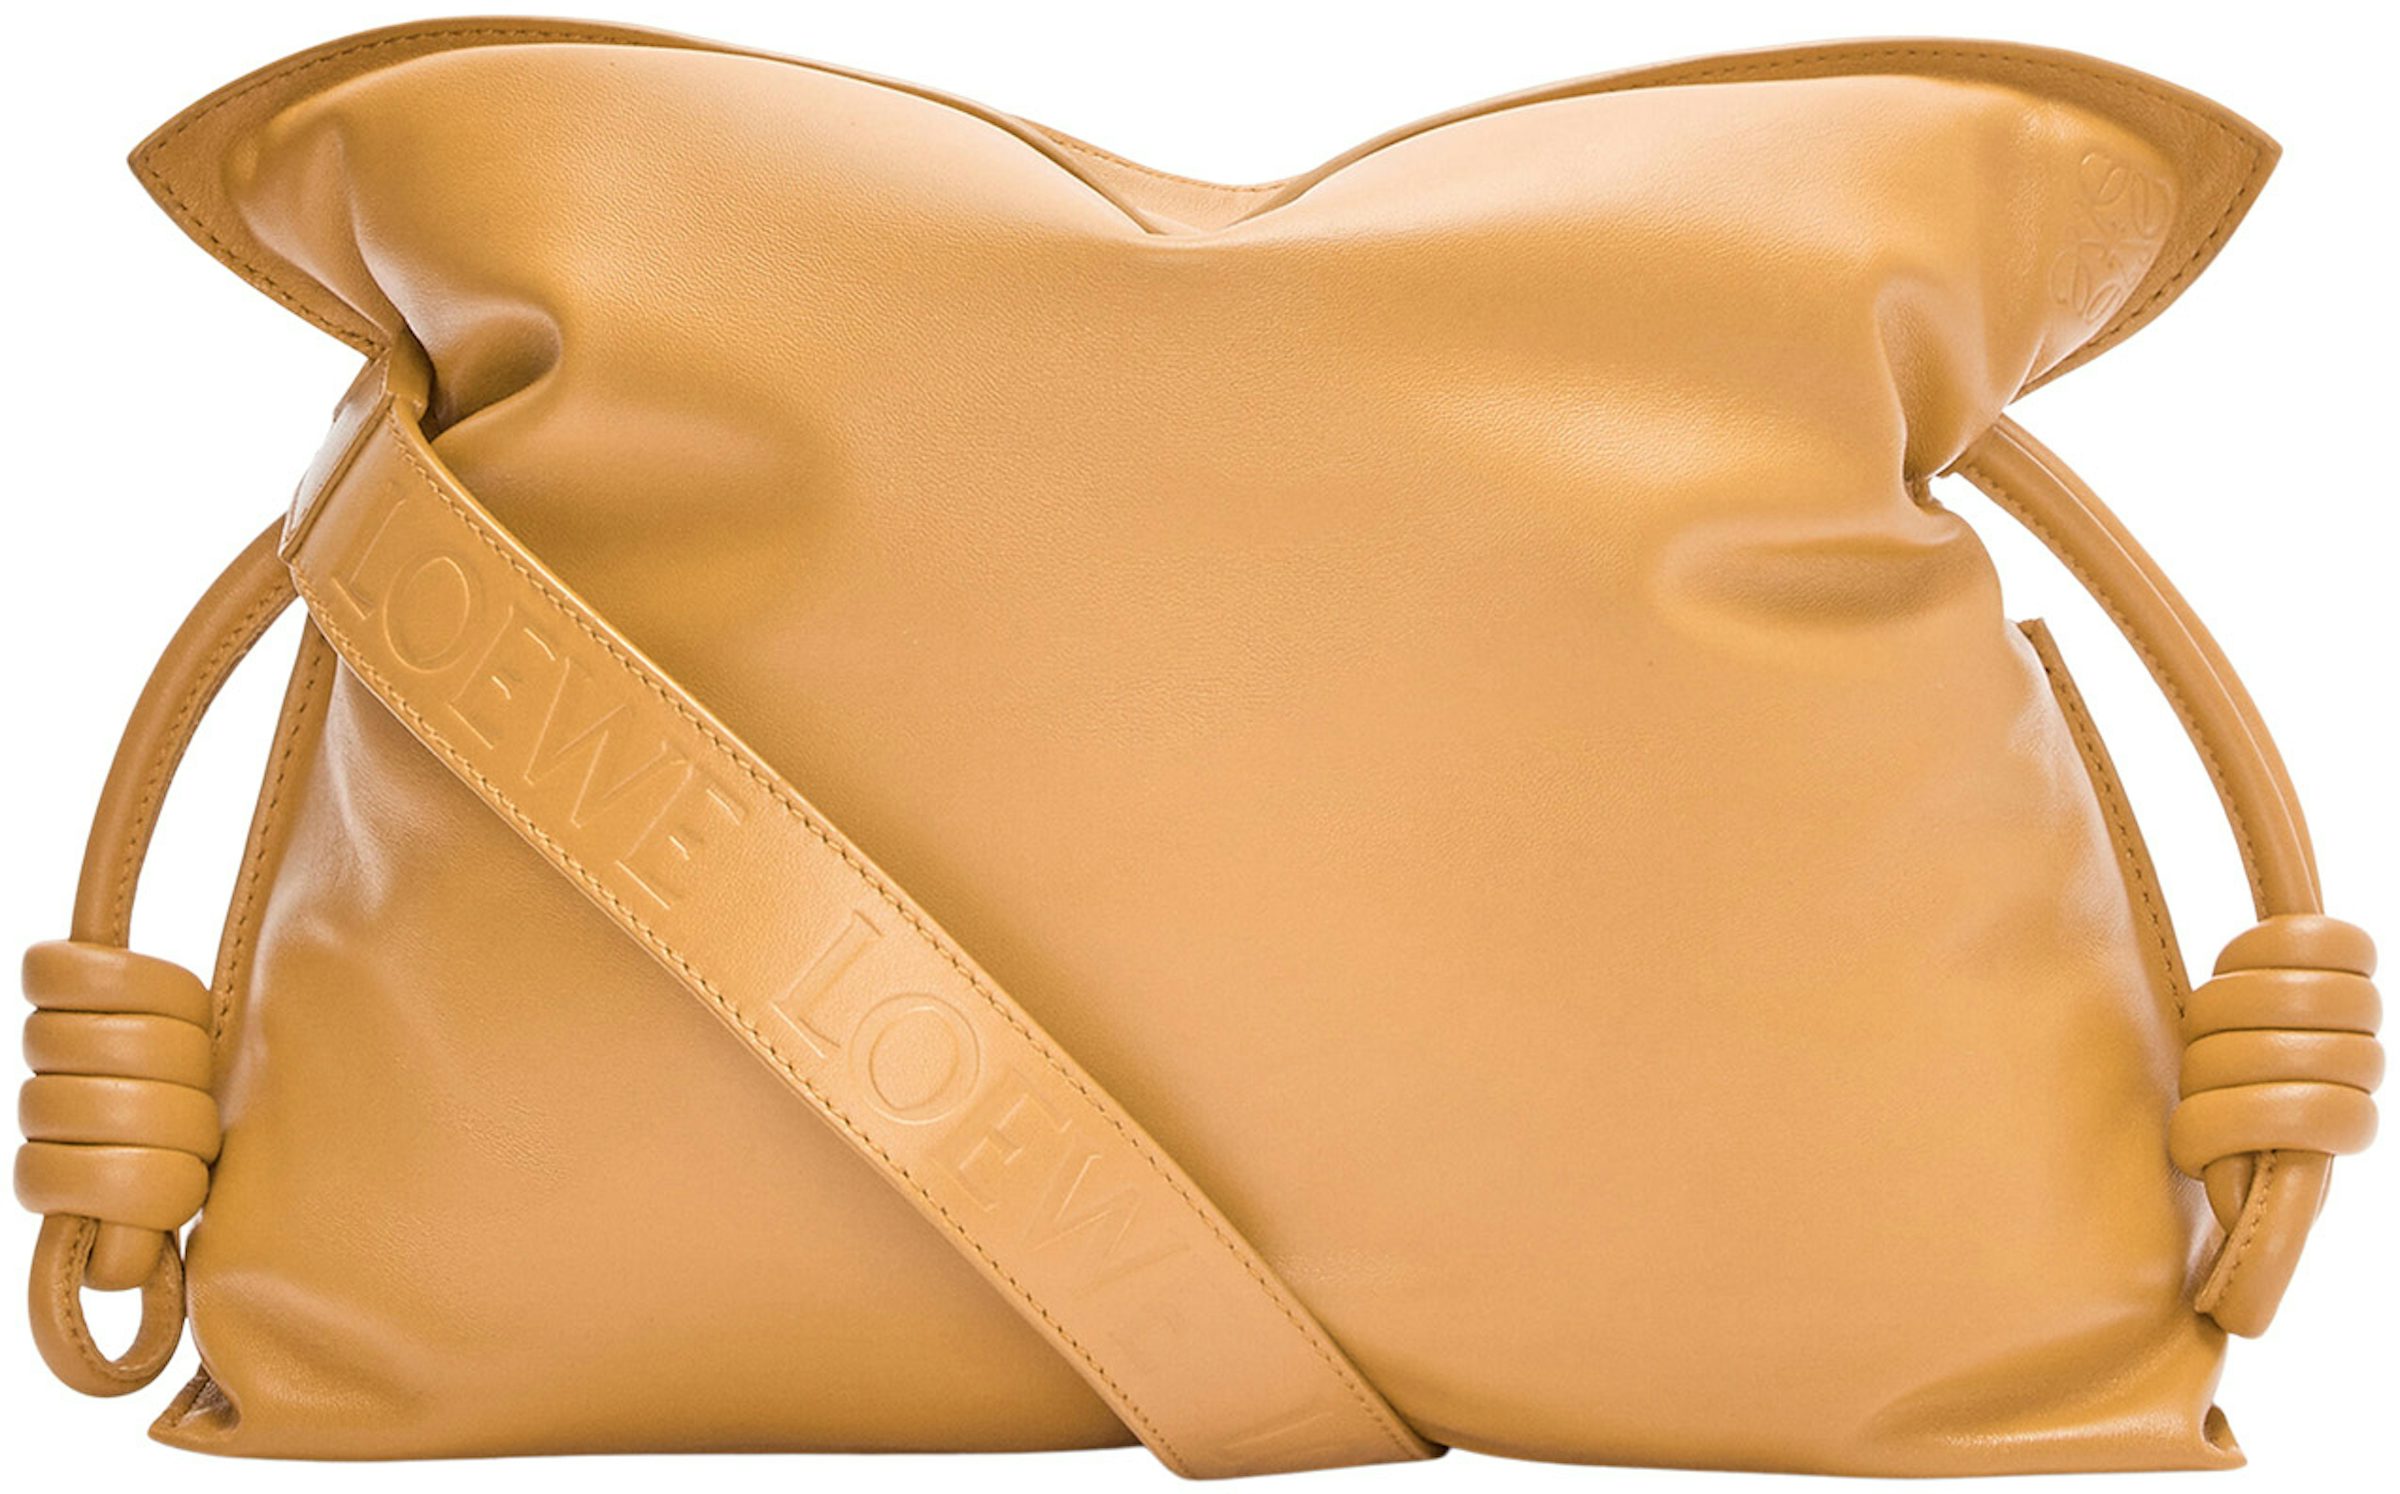 AUTH NWT $2950 Loewe Flamenco Padded Leather Clutch Shoulder Bag In Camel